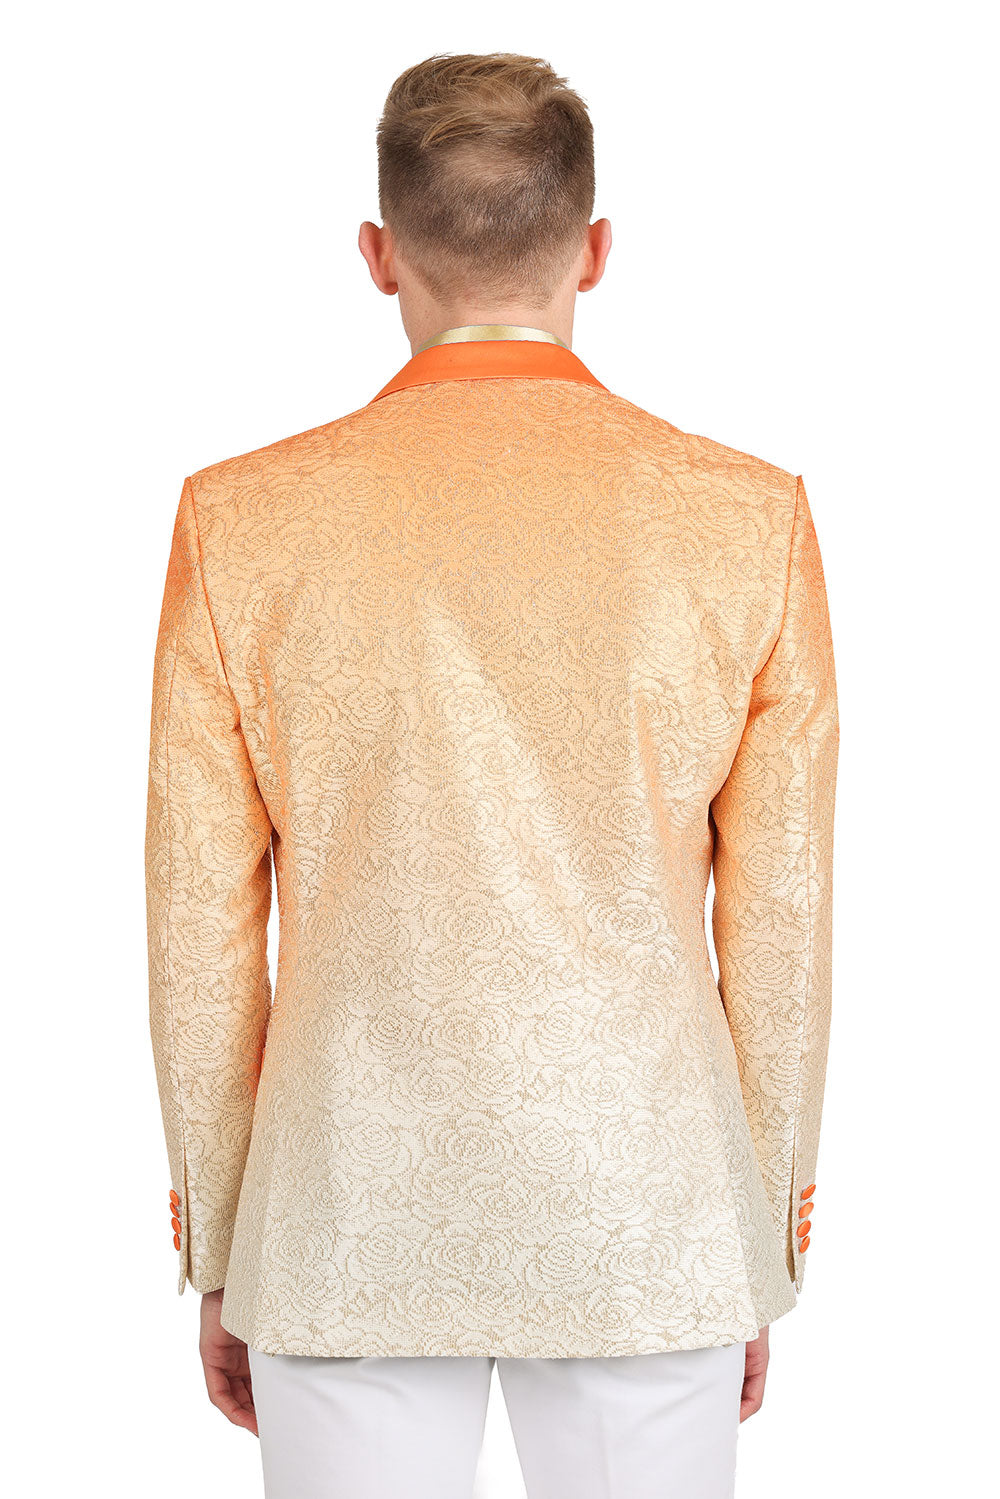 A stylish high school student wearing KCT Menswear's Dazzling Prom Blazer, showcasing its stunning two-tone orange fading effect, silver floral pattern, and gradient design - perfect for a memorable prom night.